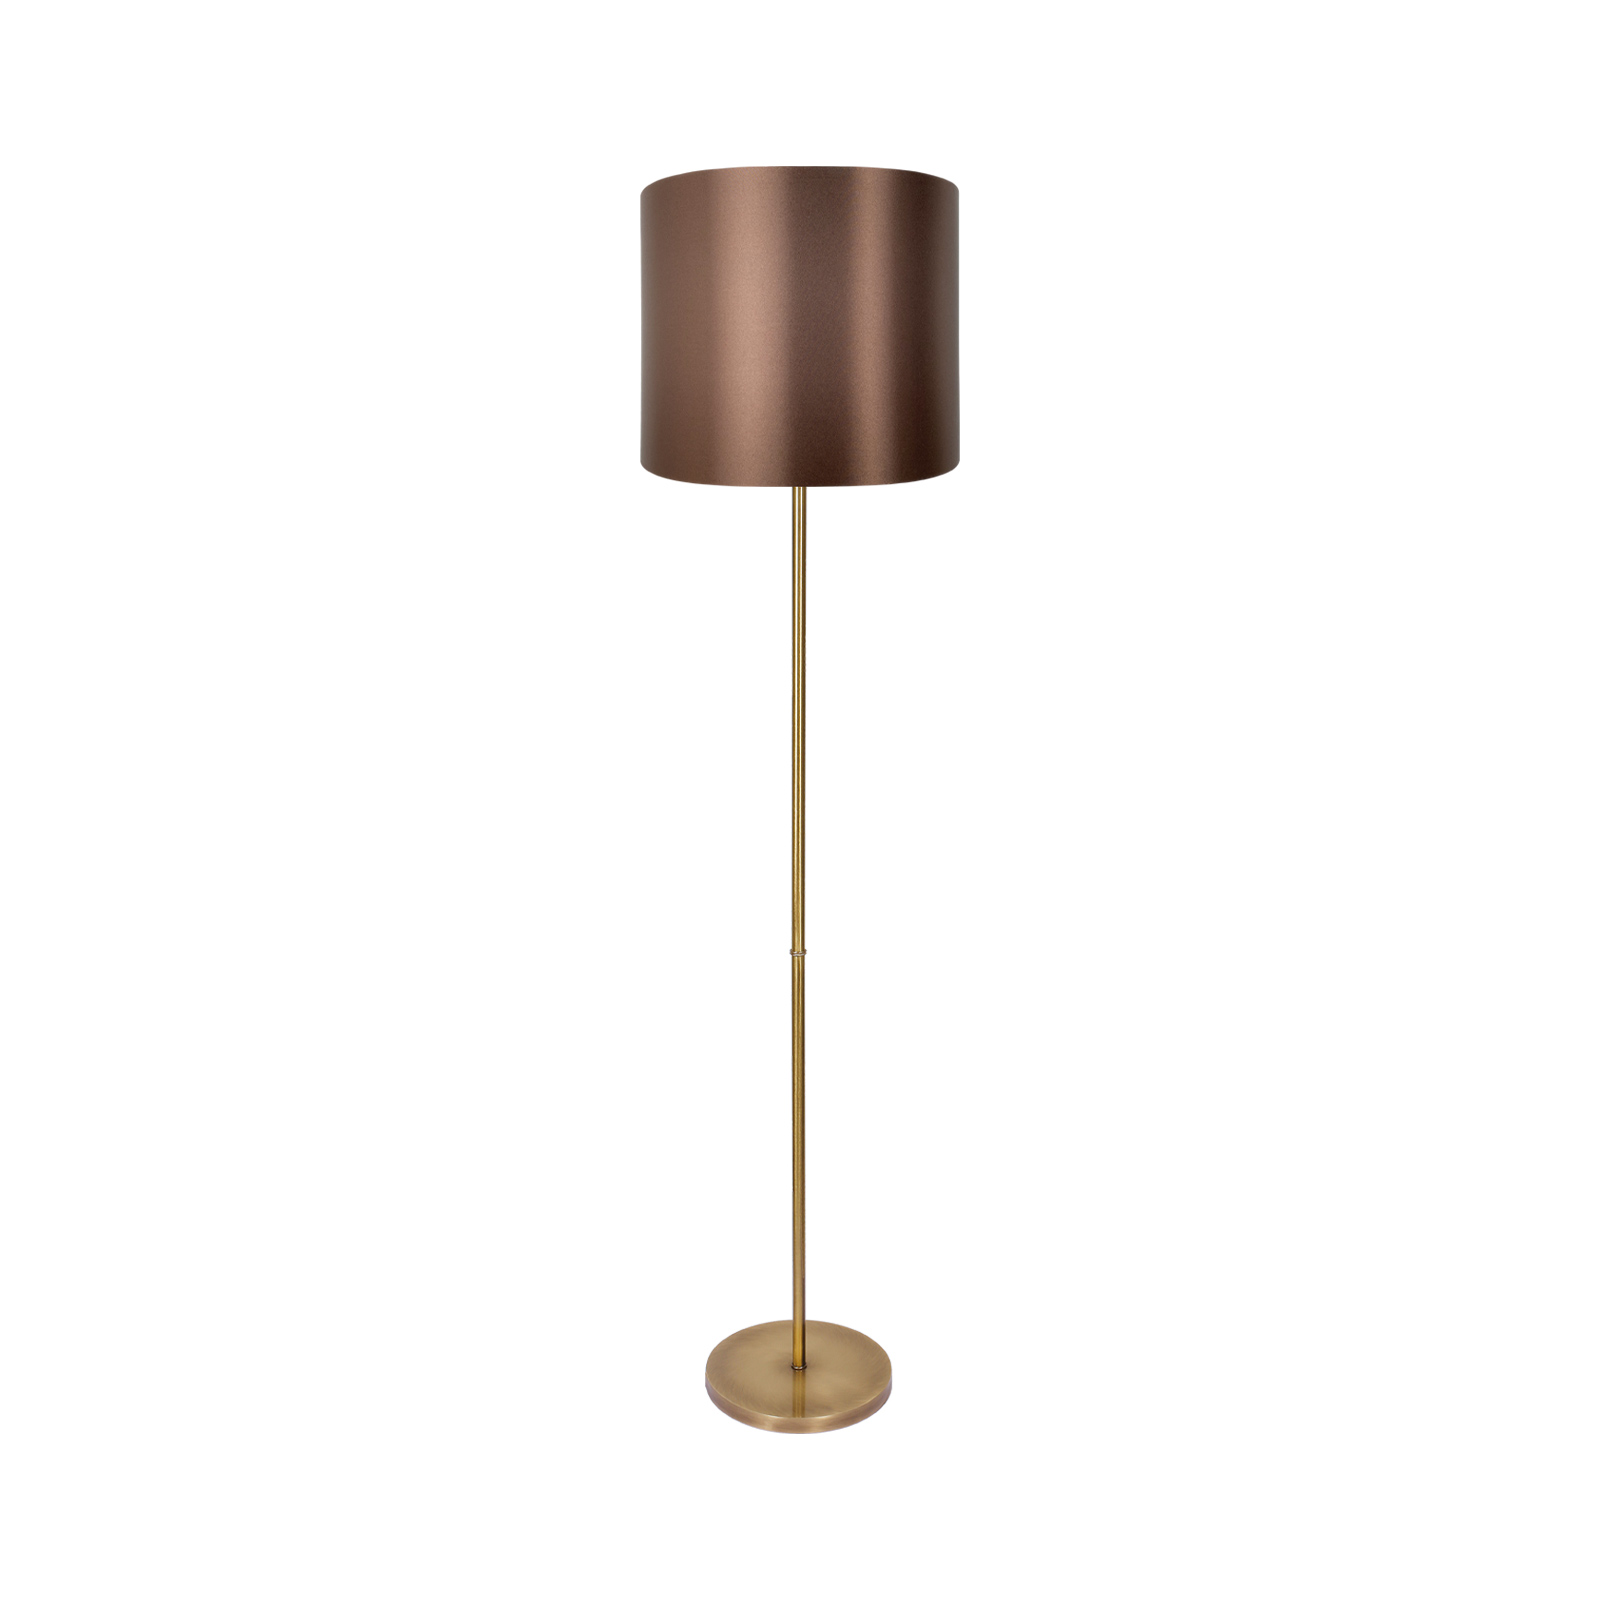 Stehlampe E27 160,5 cm in Bronze hell Braun Messing Stoff